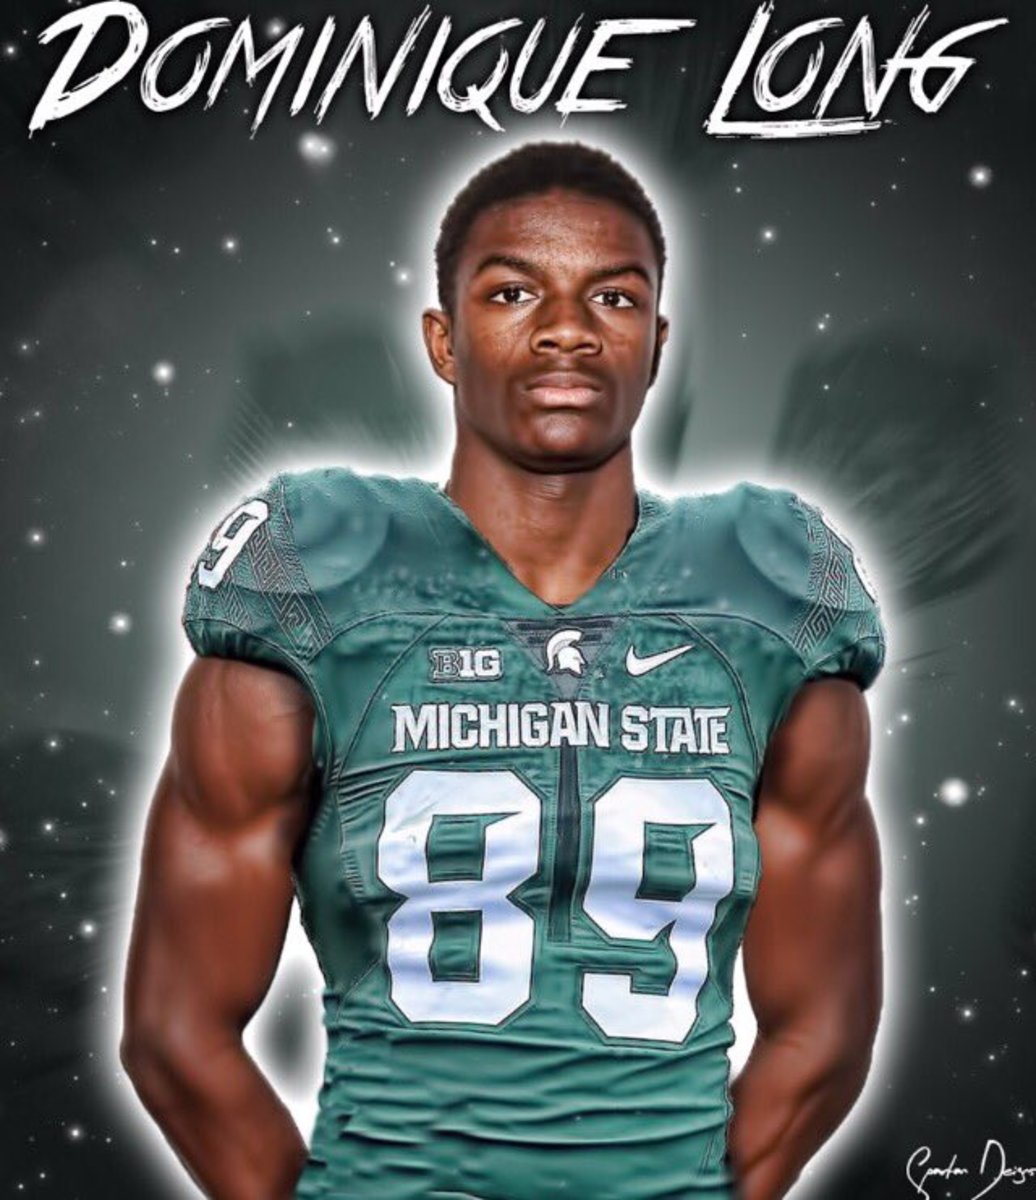 Dominique Long photo courtesy of @sparty_designs